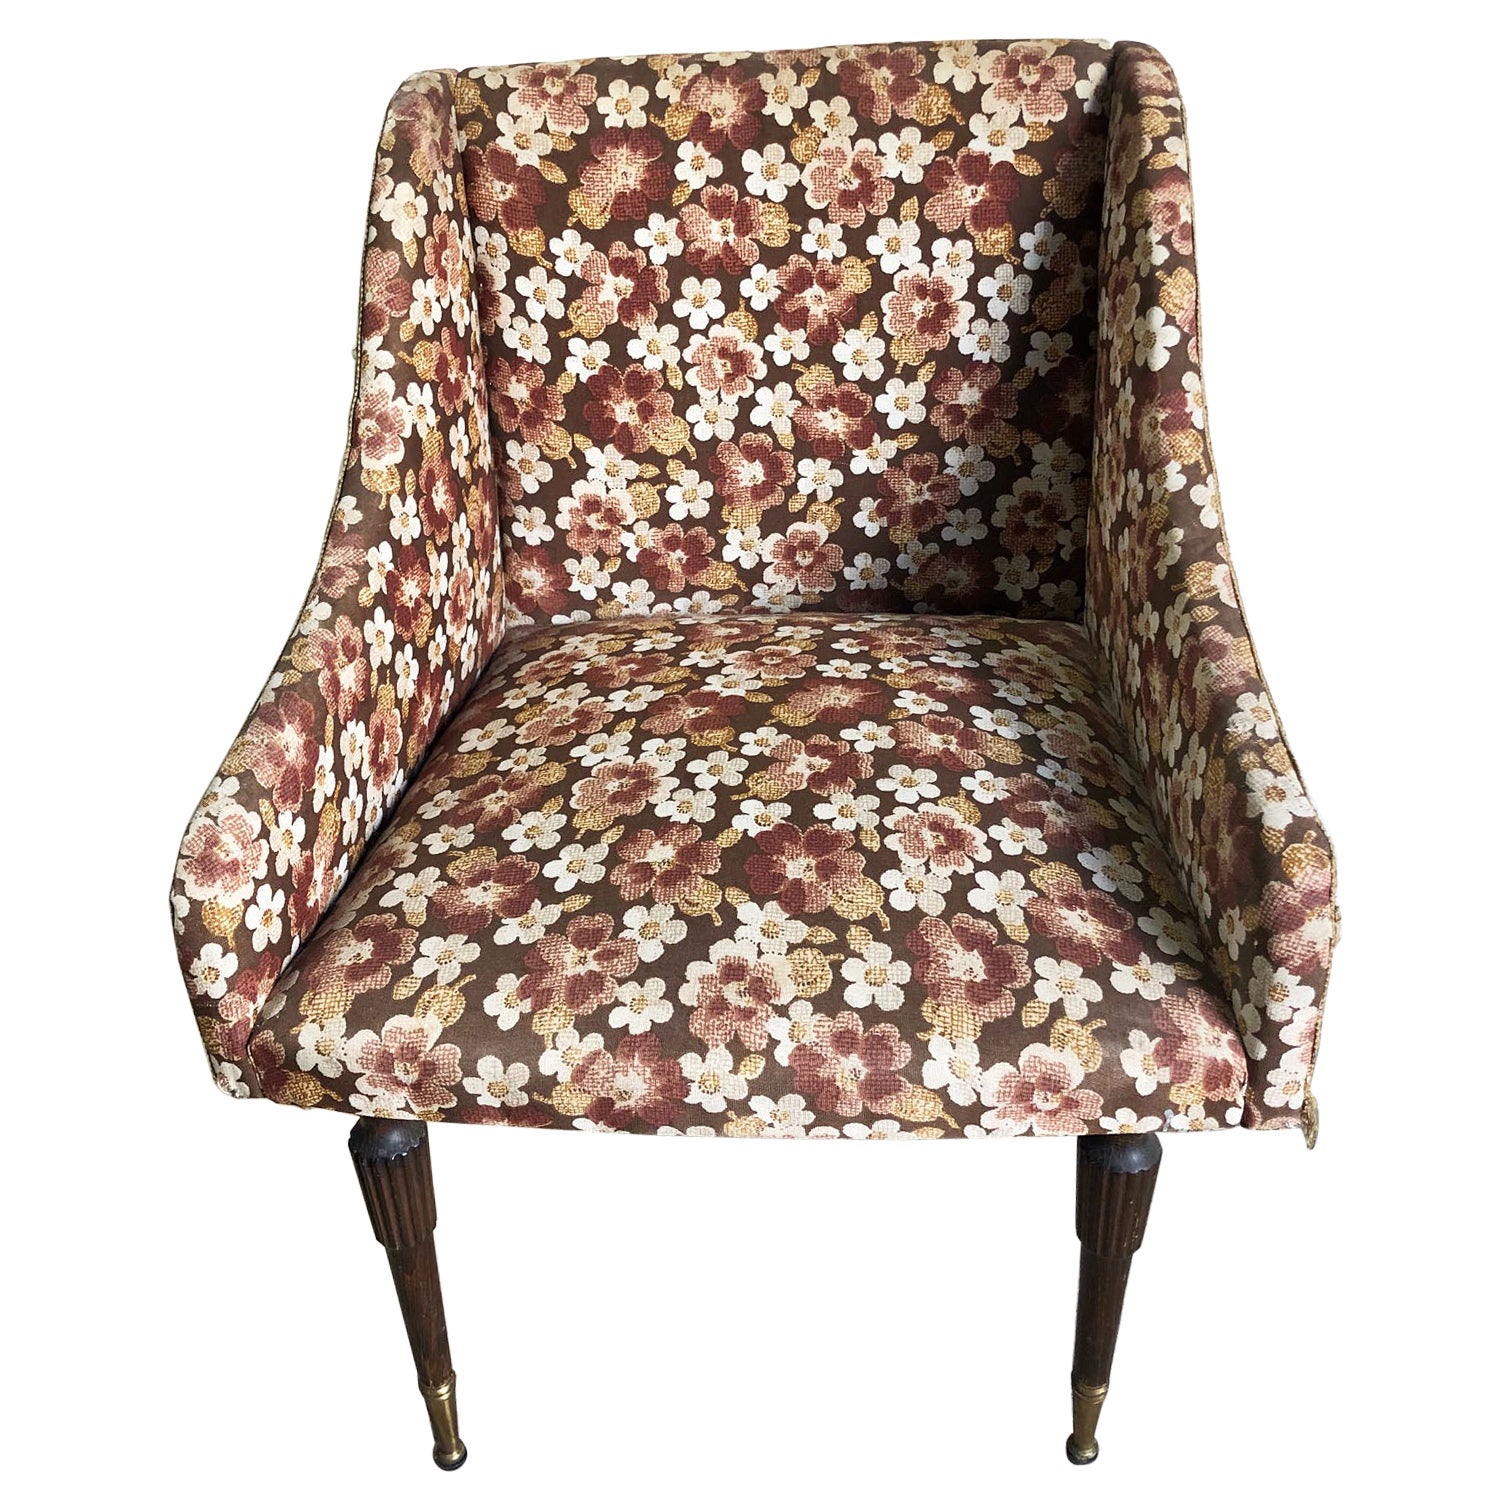 Original Armchair from the 60s, Fabric with Floral Motif